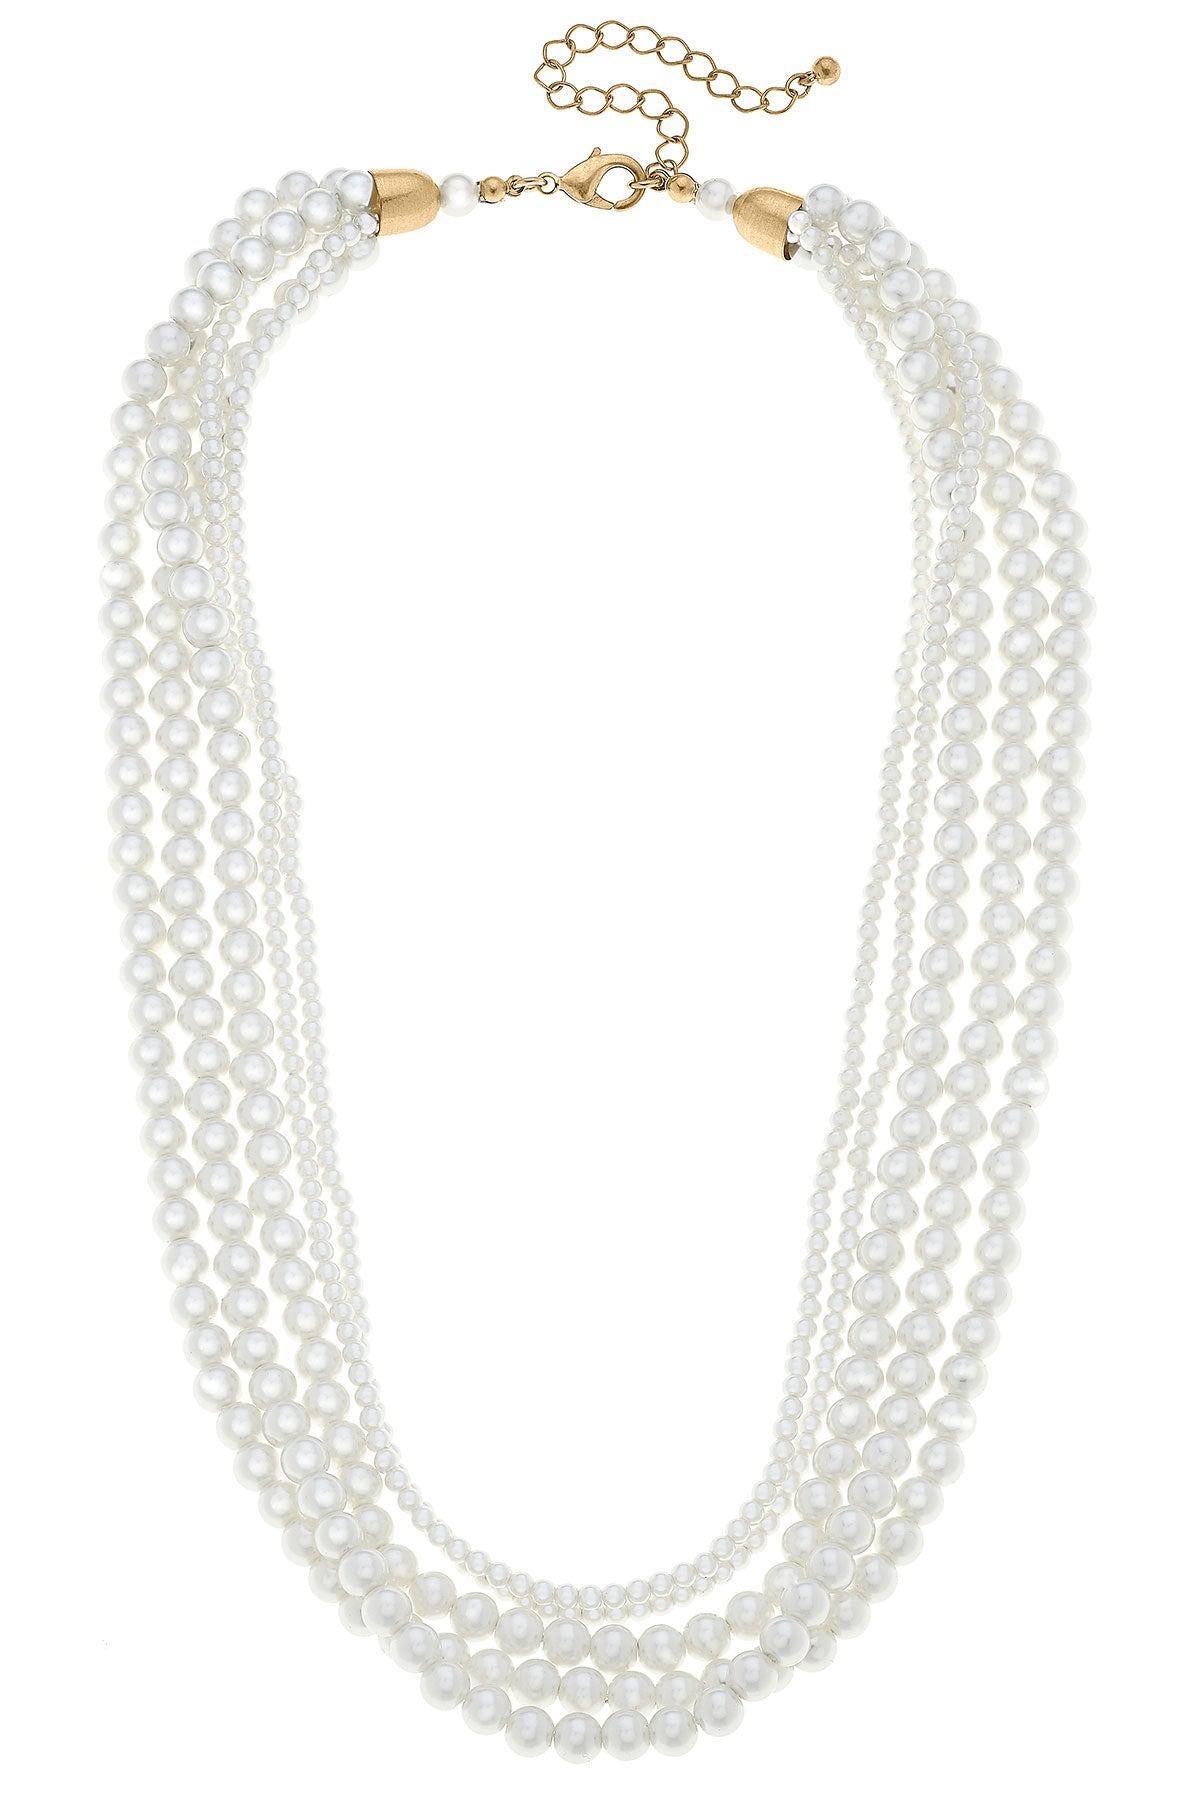 Theresa Pearl Multi Strand Necklace in Ivory